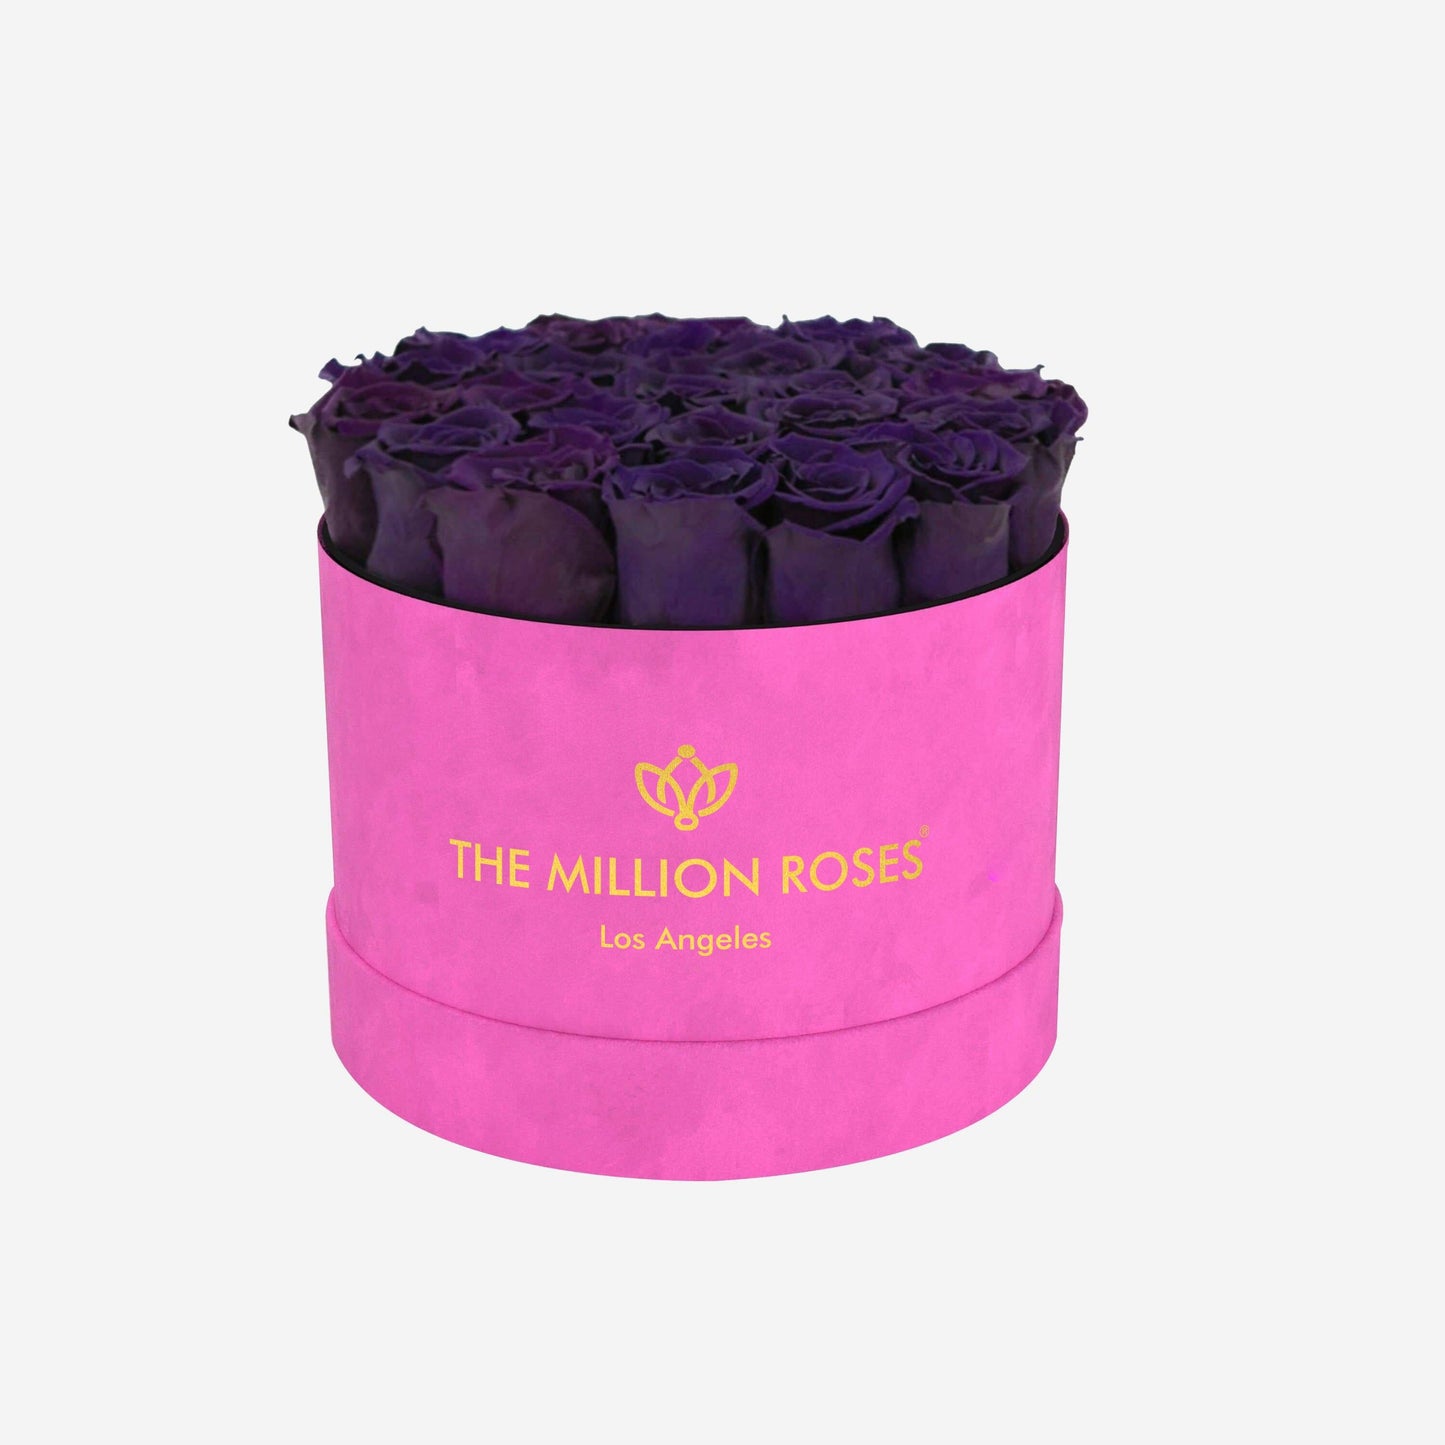 Classic Hot Pink Suede Box | Dark Purple Roses - The Million Roses